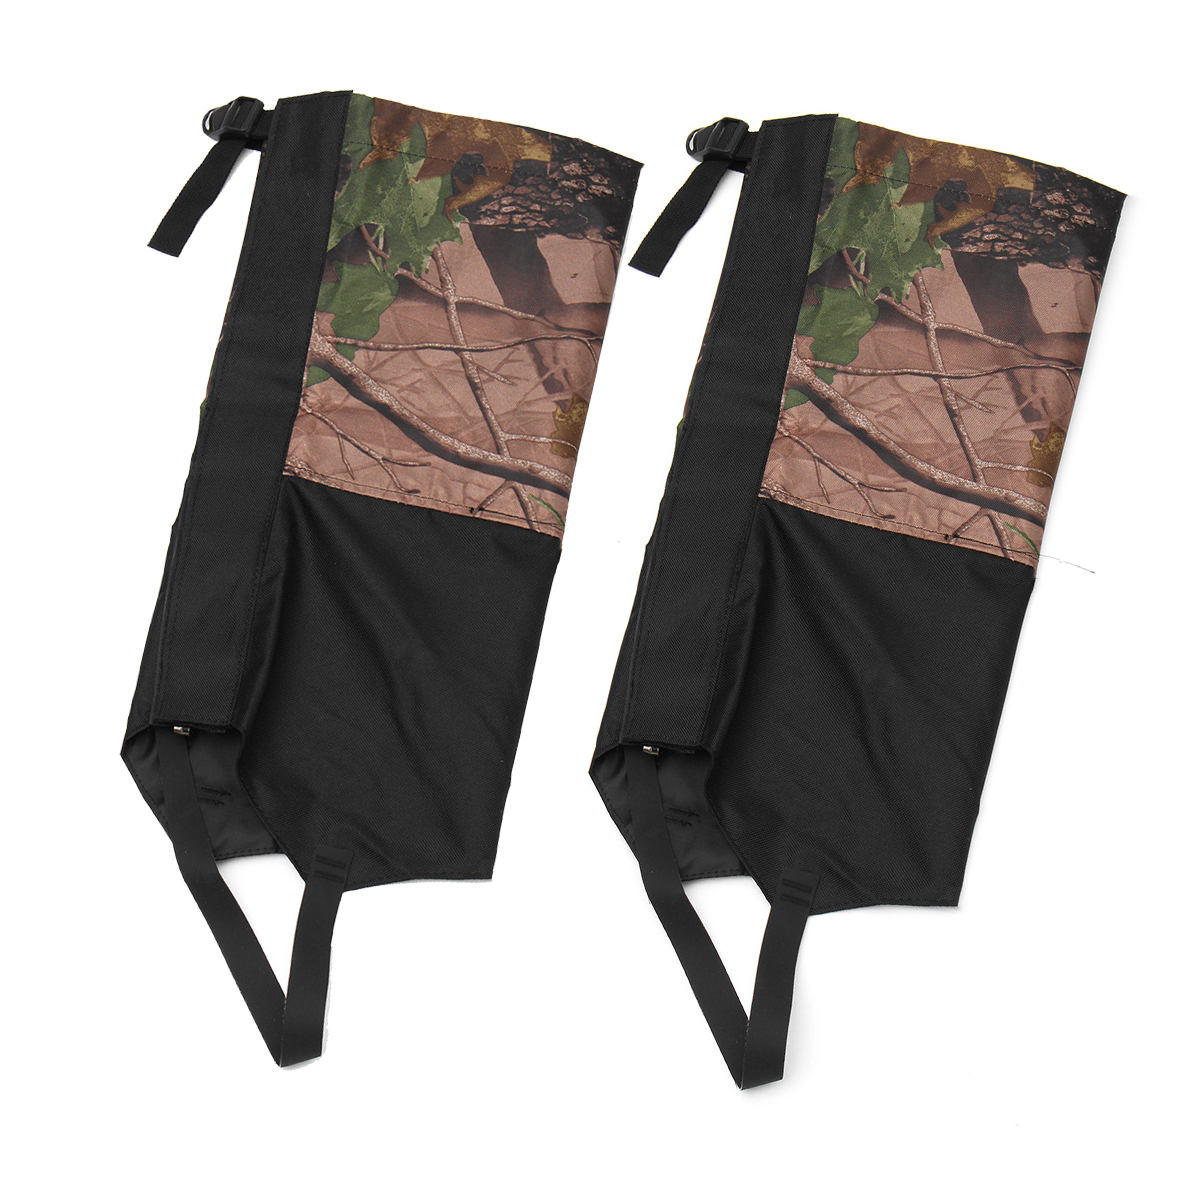 1-Pair-Camouflage-Waterproof-Outdoor-Climbing-Hiking-Snow-Gaiters-Leg-Cover-Boot-Legging-Wrap-1194858